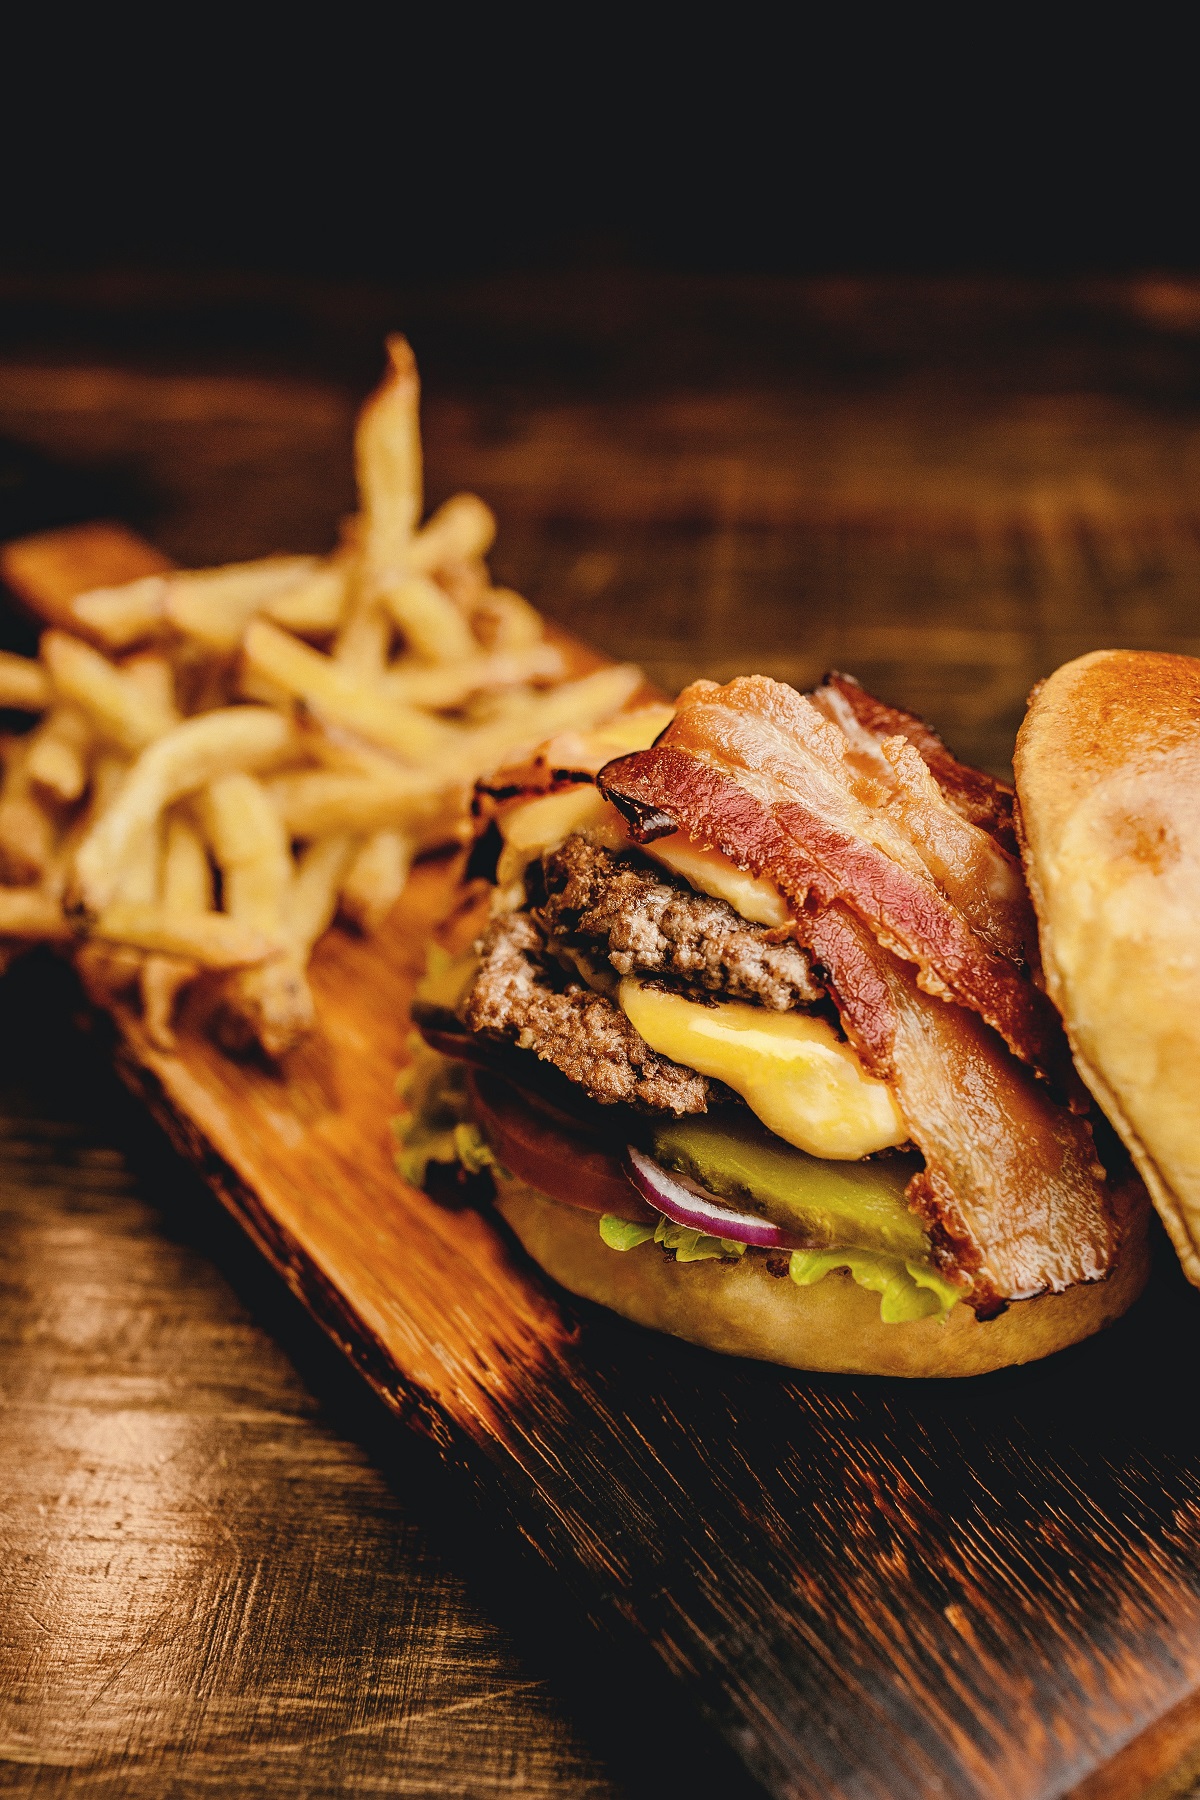 Cheeseburger with pickles and bacon served on a wooden plate with fries